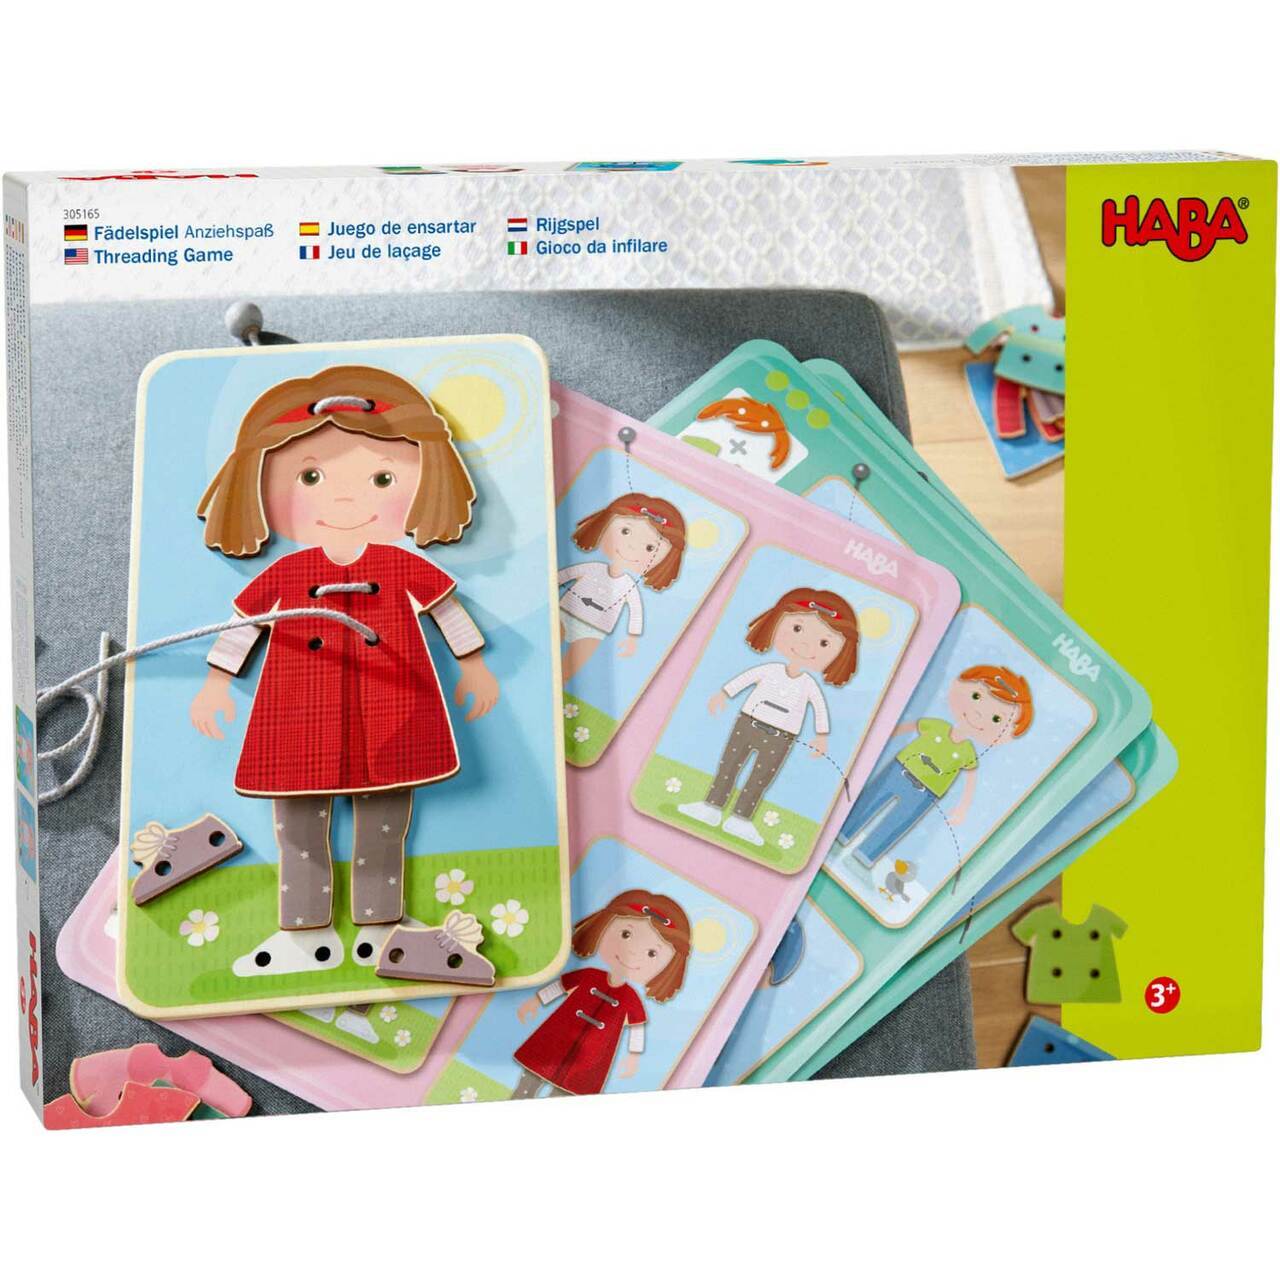 HABA Dress Me Threading Game - Wood Wood Toys Canada's Favourite Montessori Toy Store